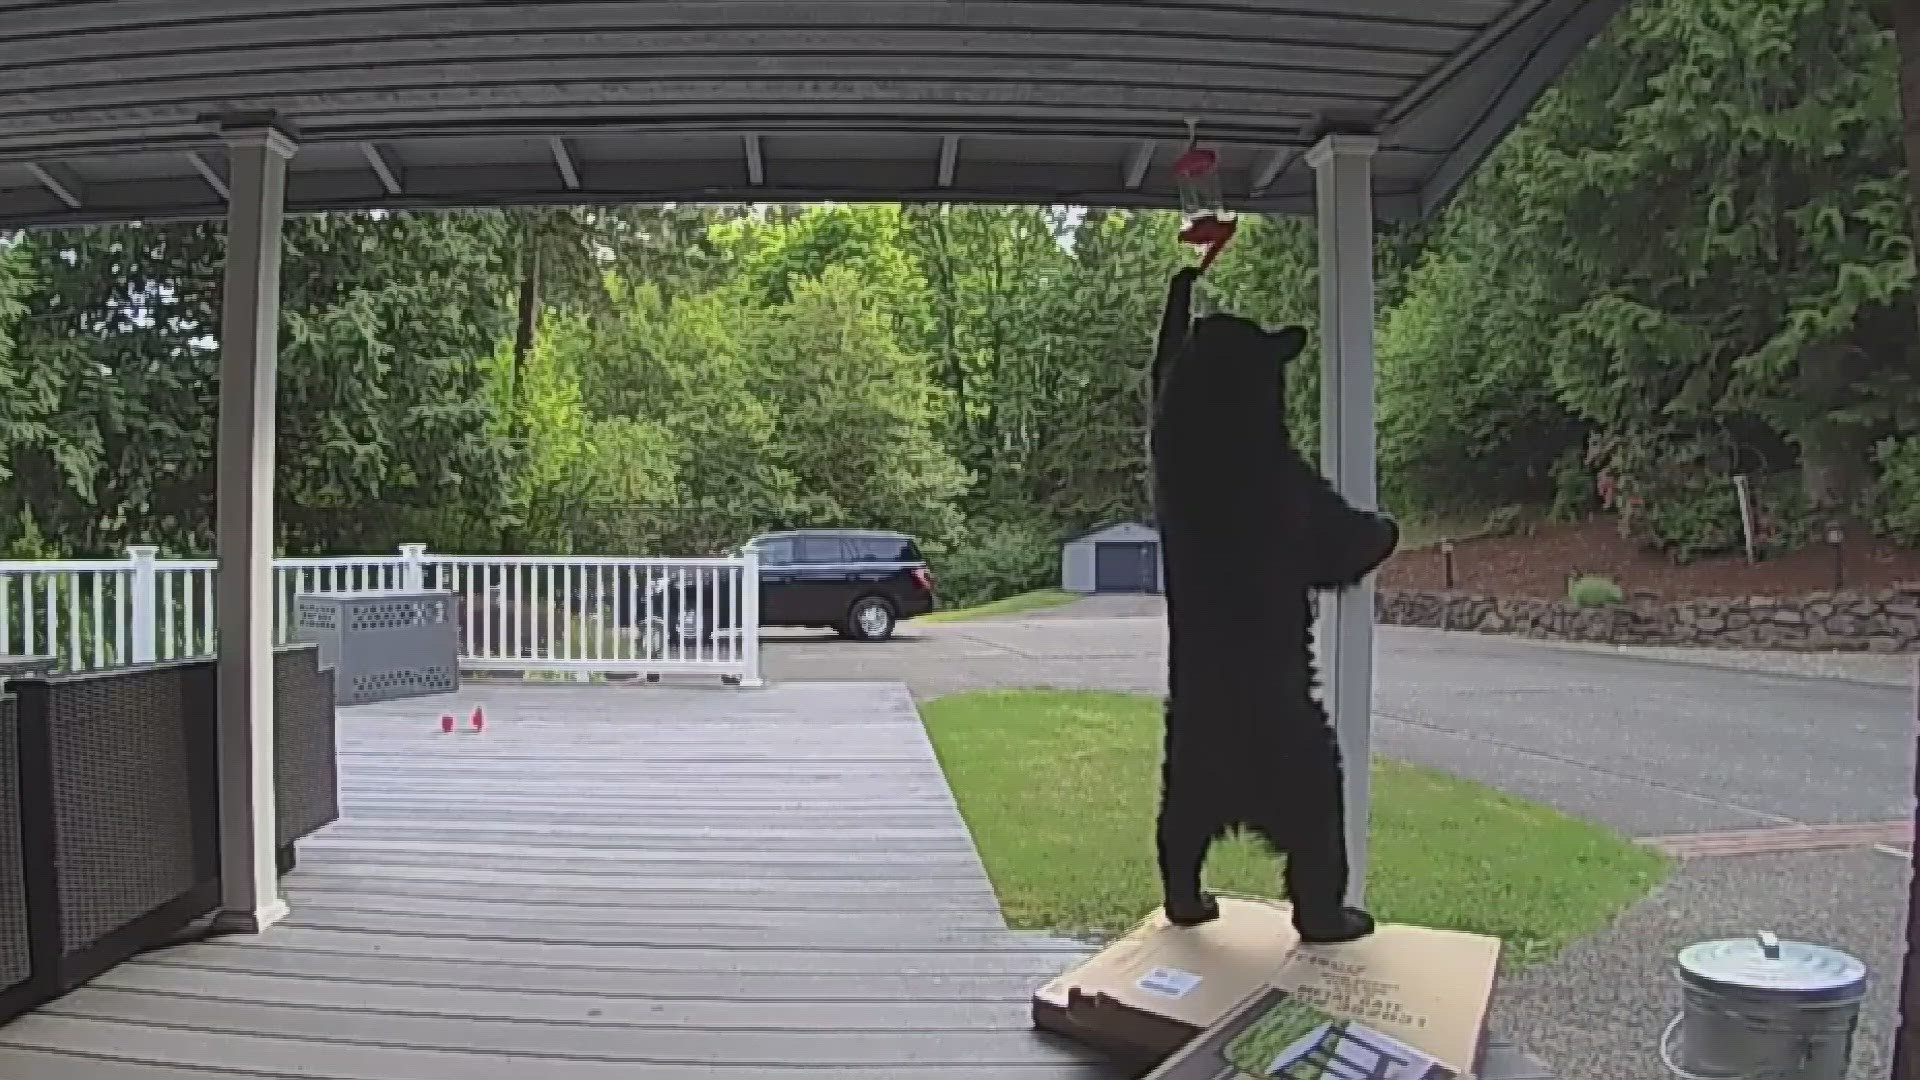 A black bear was spotted roaming Issaquah streets in a video posted by the City of Issaquah.